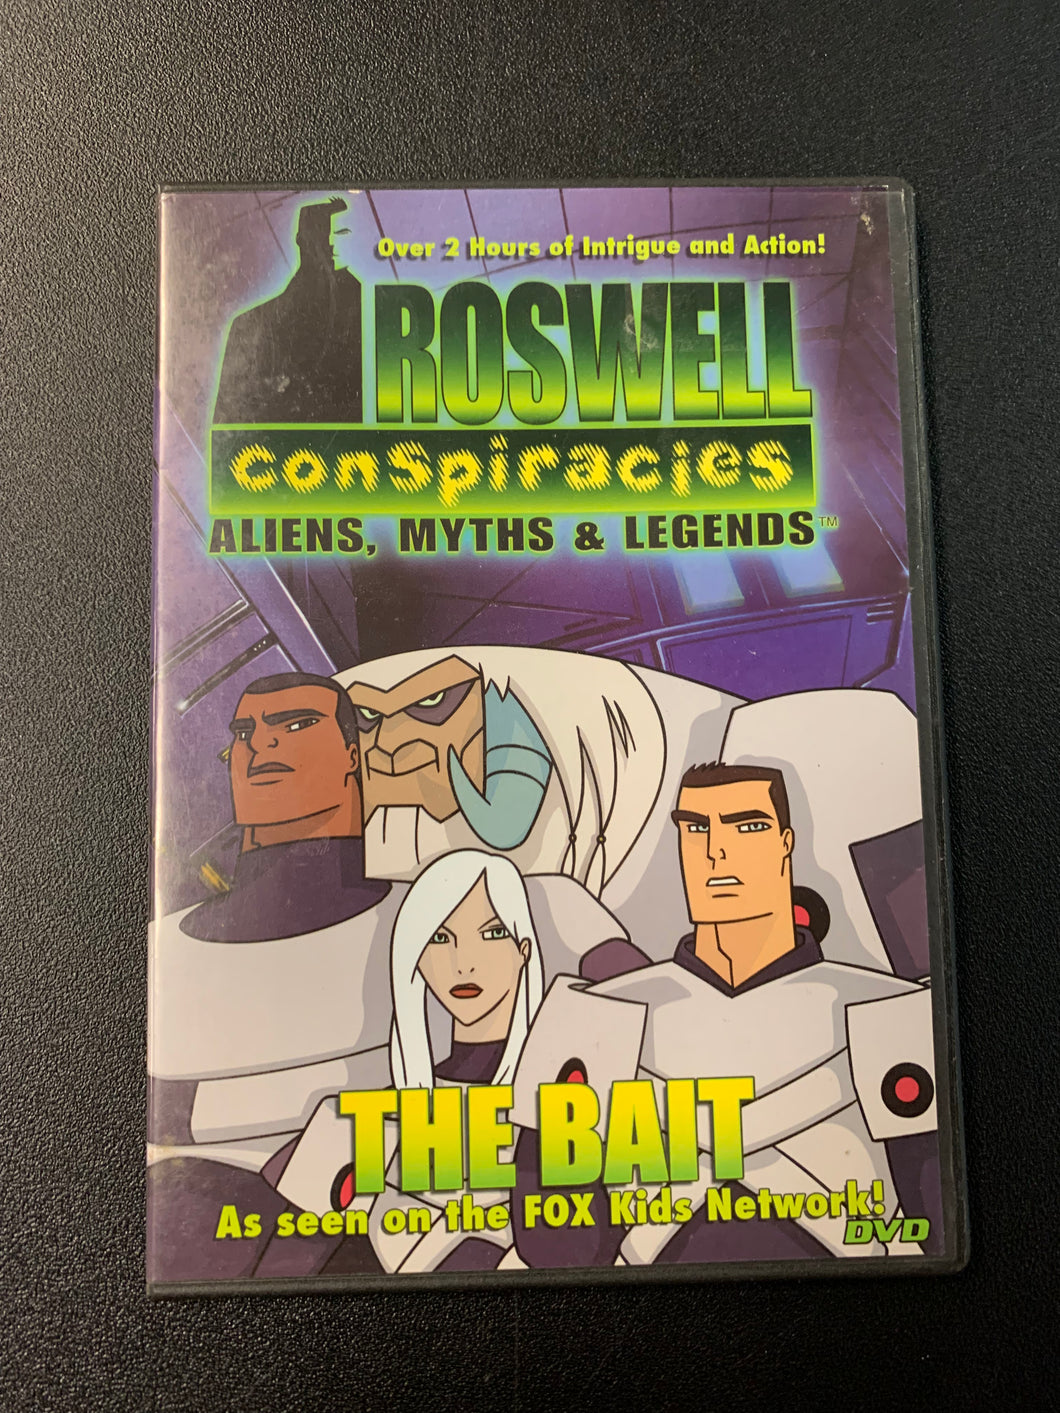 ROSWELL CONSPIRACIES ALIENS MYTHS & LEGENDS THE BAIT DVD PREOWNED